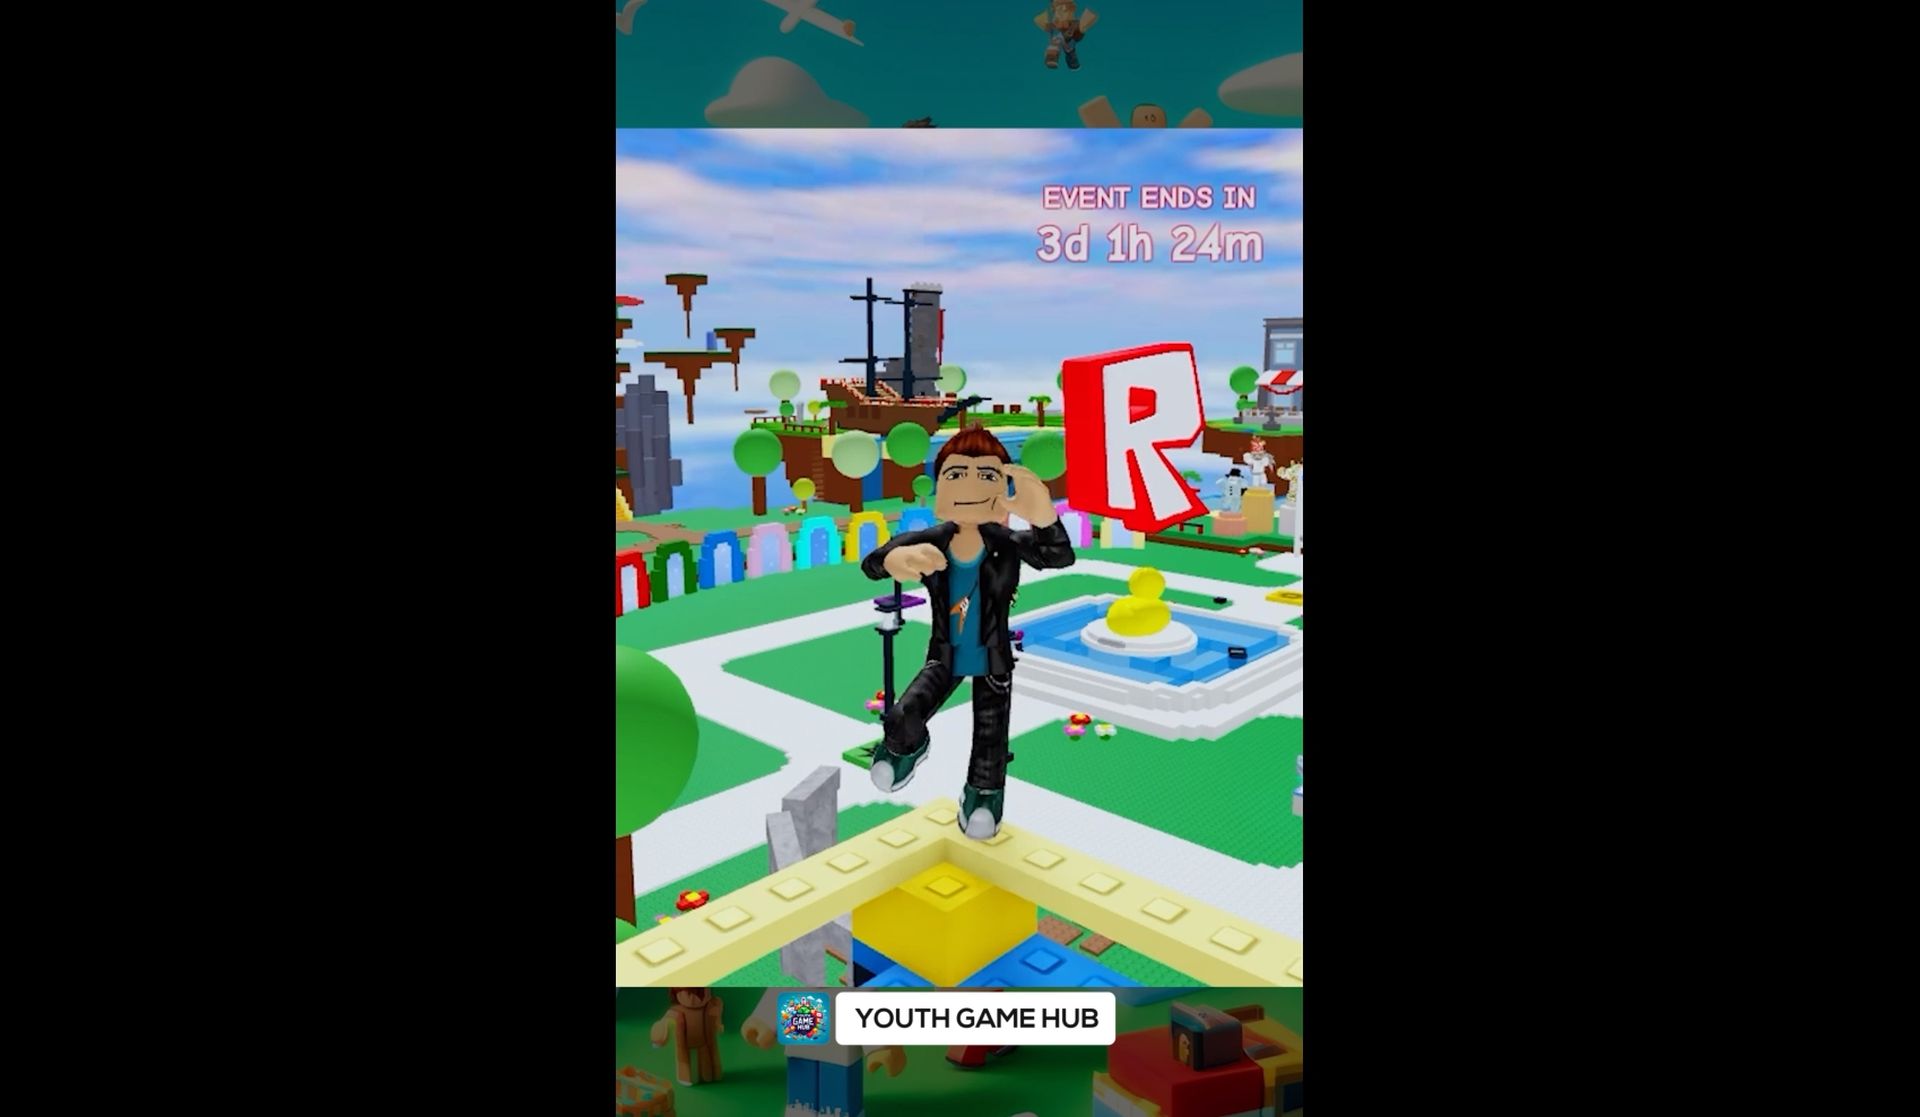 how to dance in roblox